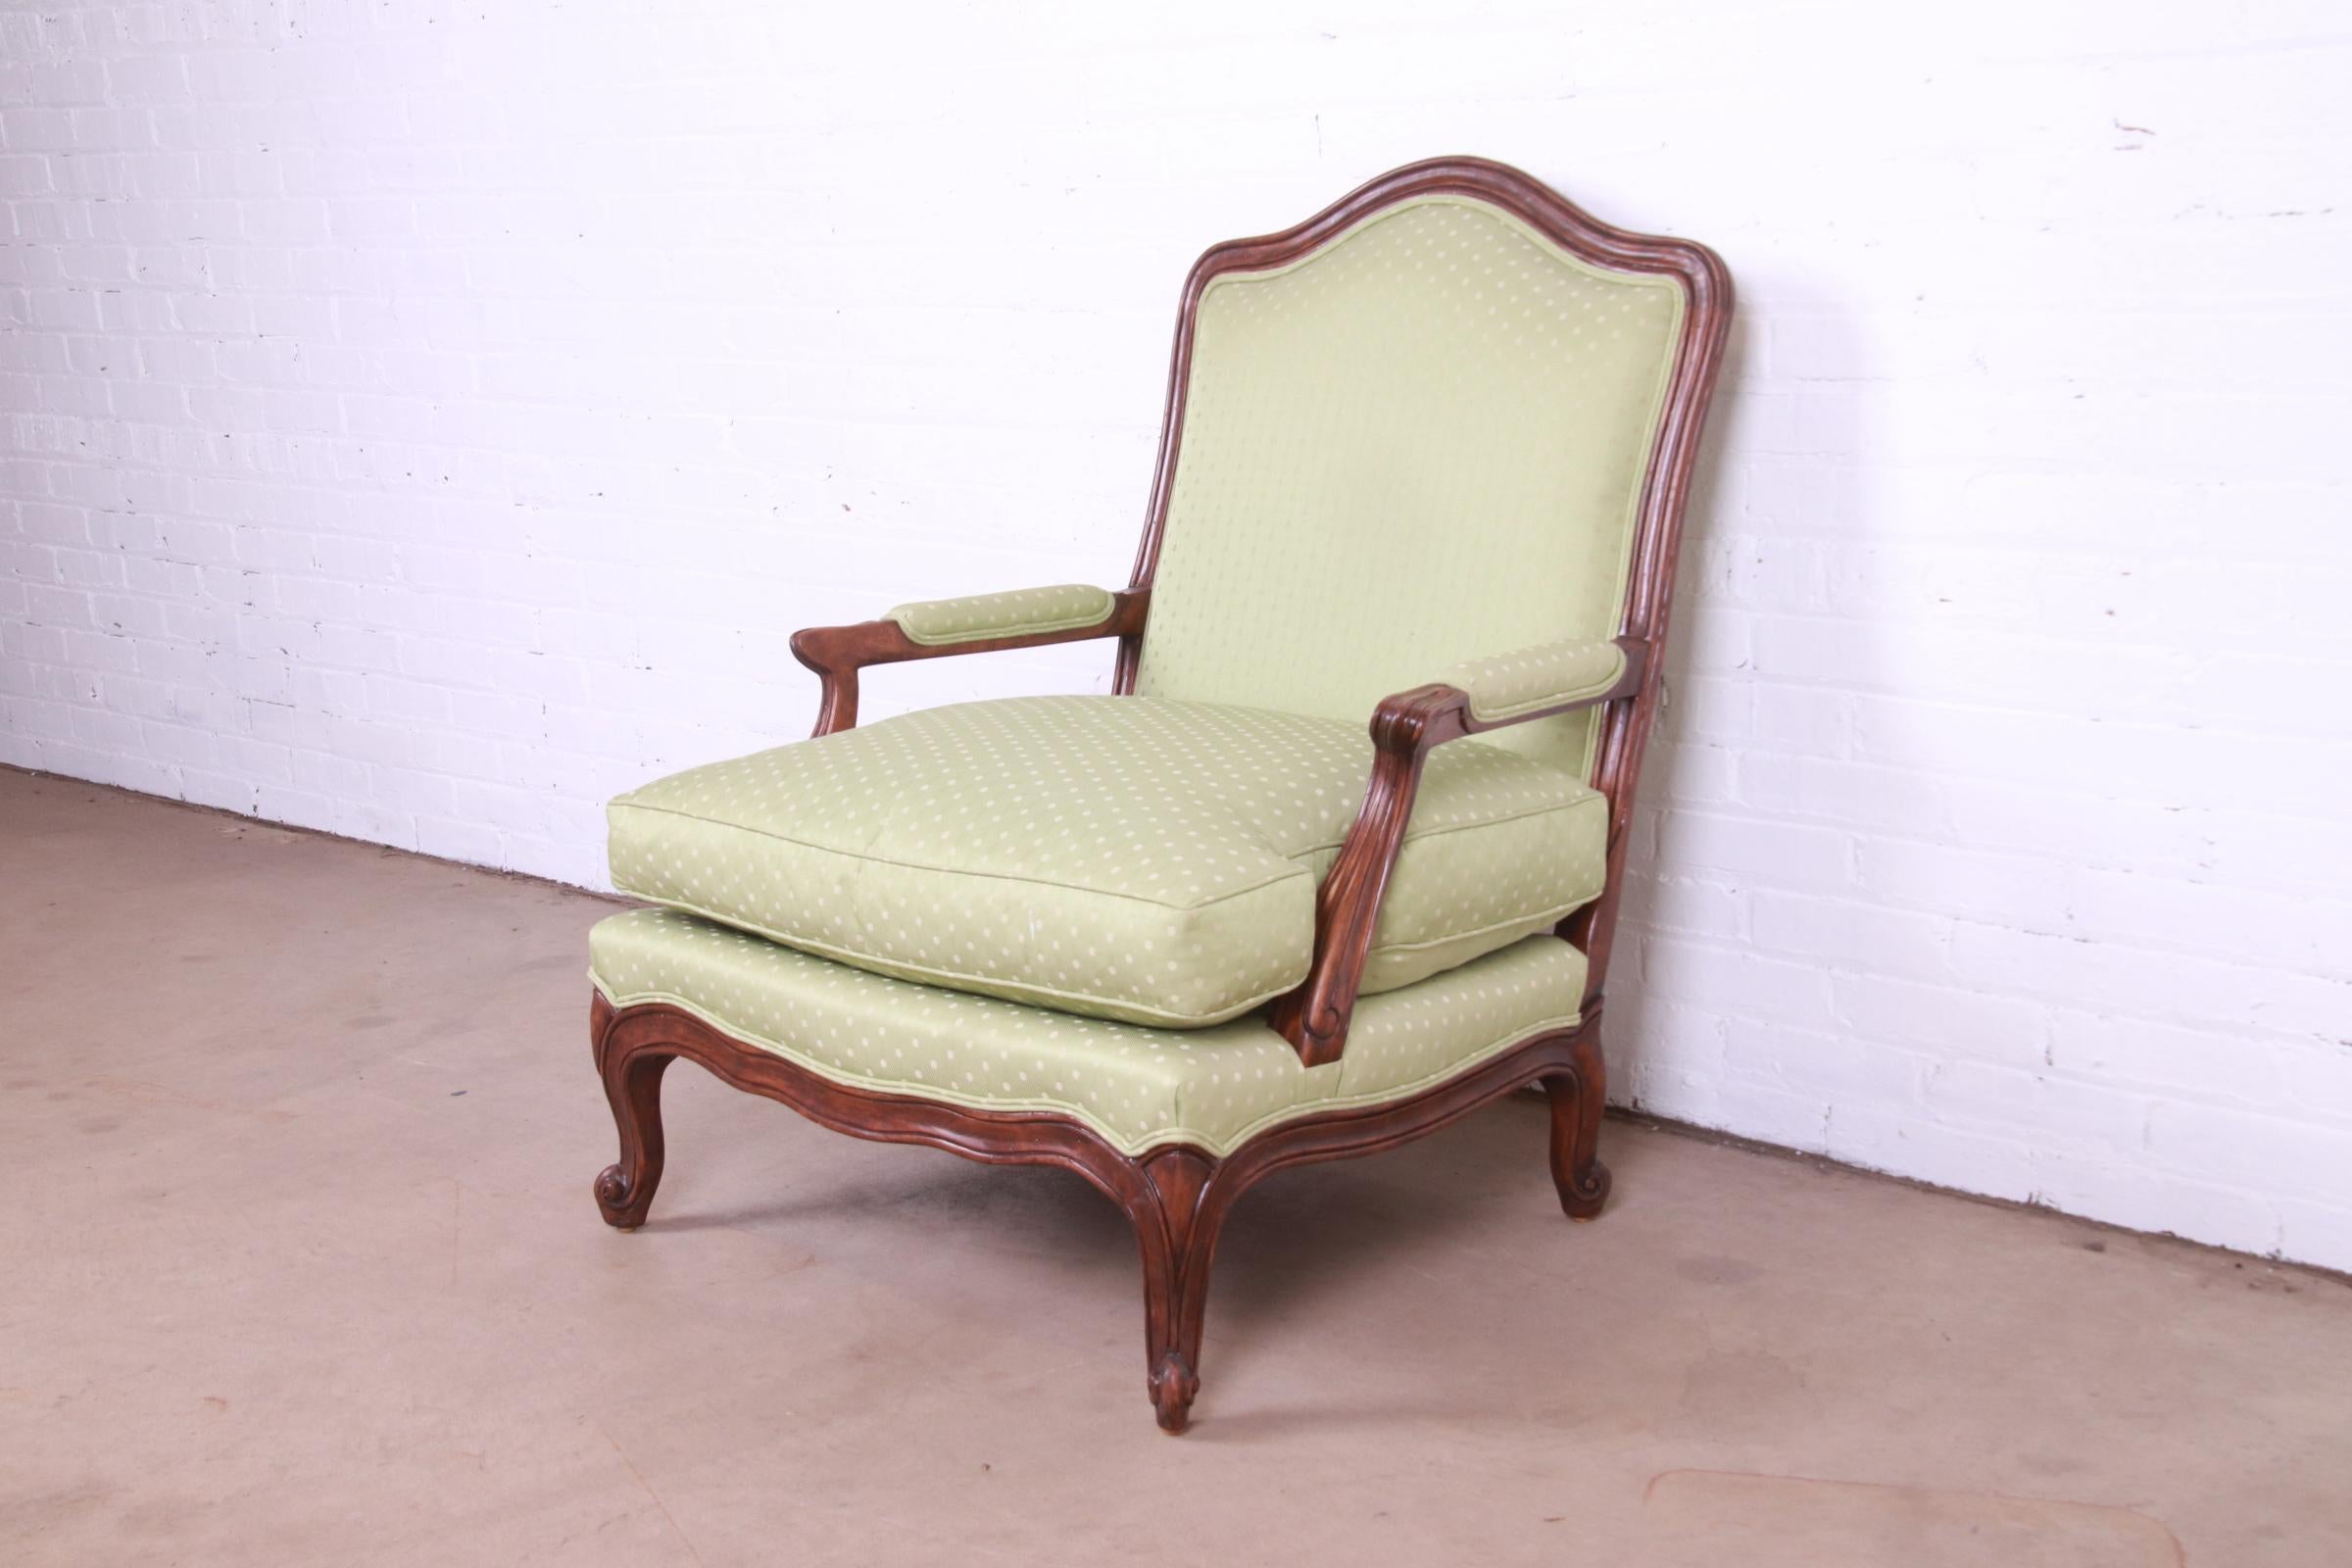 Minton-Spidell French Provincial Carved Walnut Upholstered Fauteuil with Ottoman For Sale 5